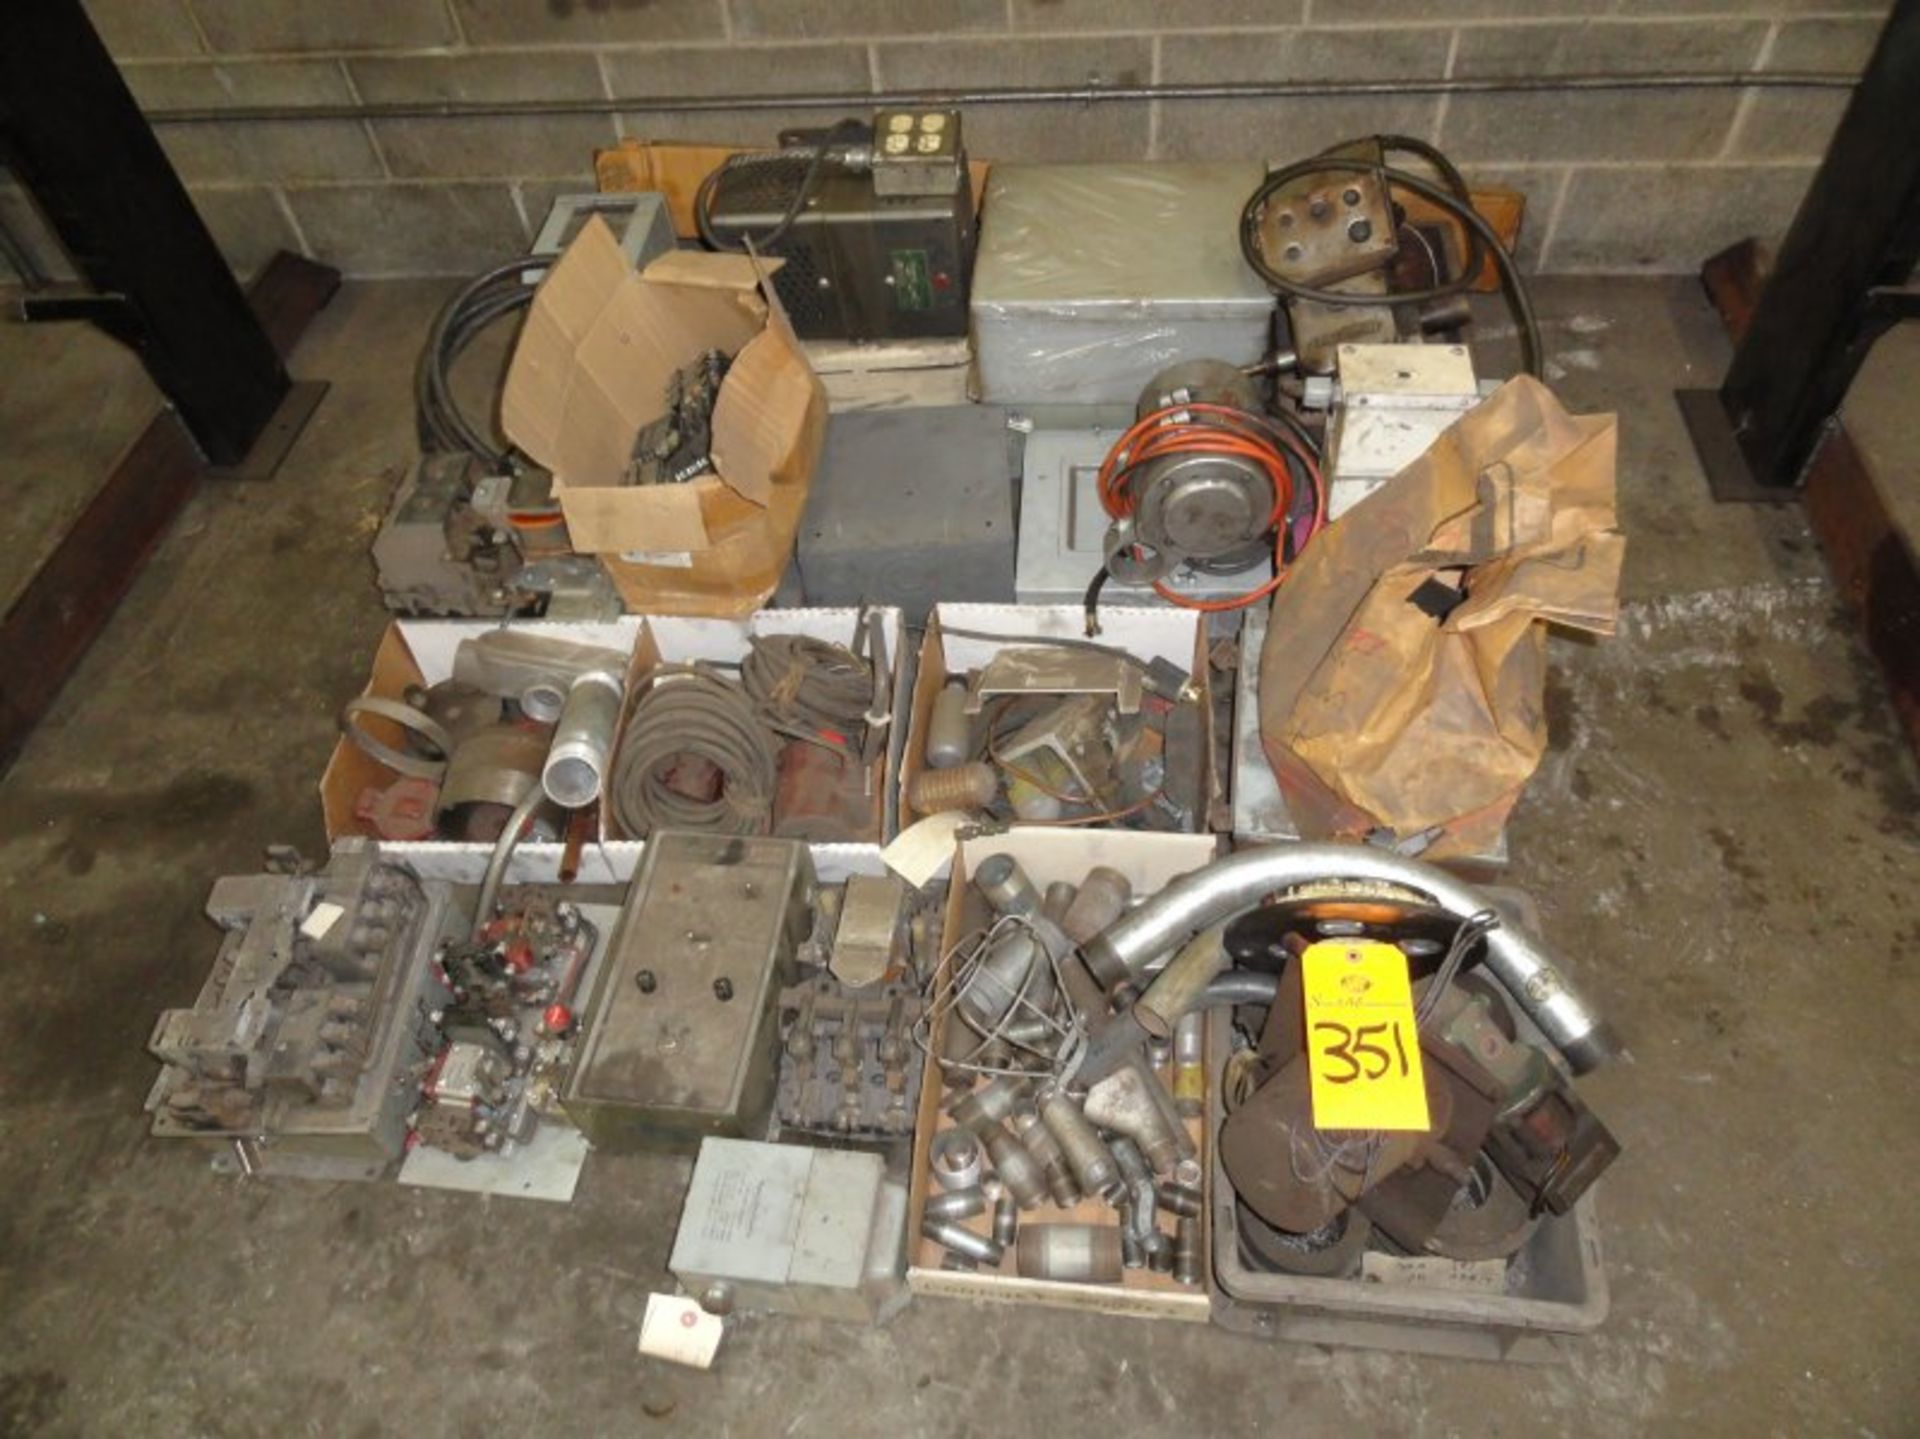 Assorted electrical, relays, electrical boxes, breakers, Bridgeport power feed, transformer